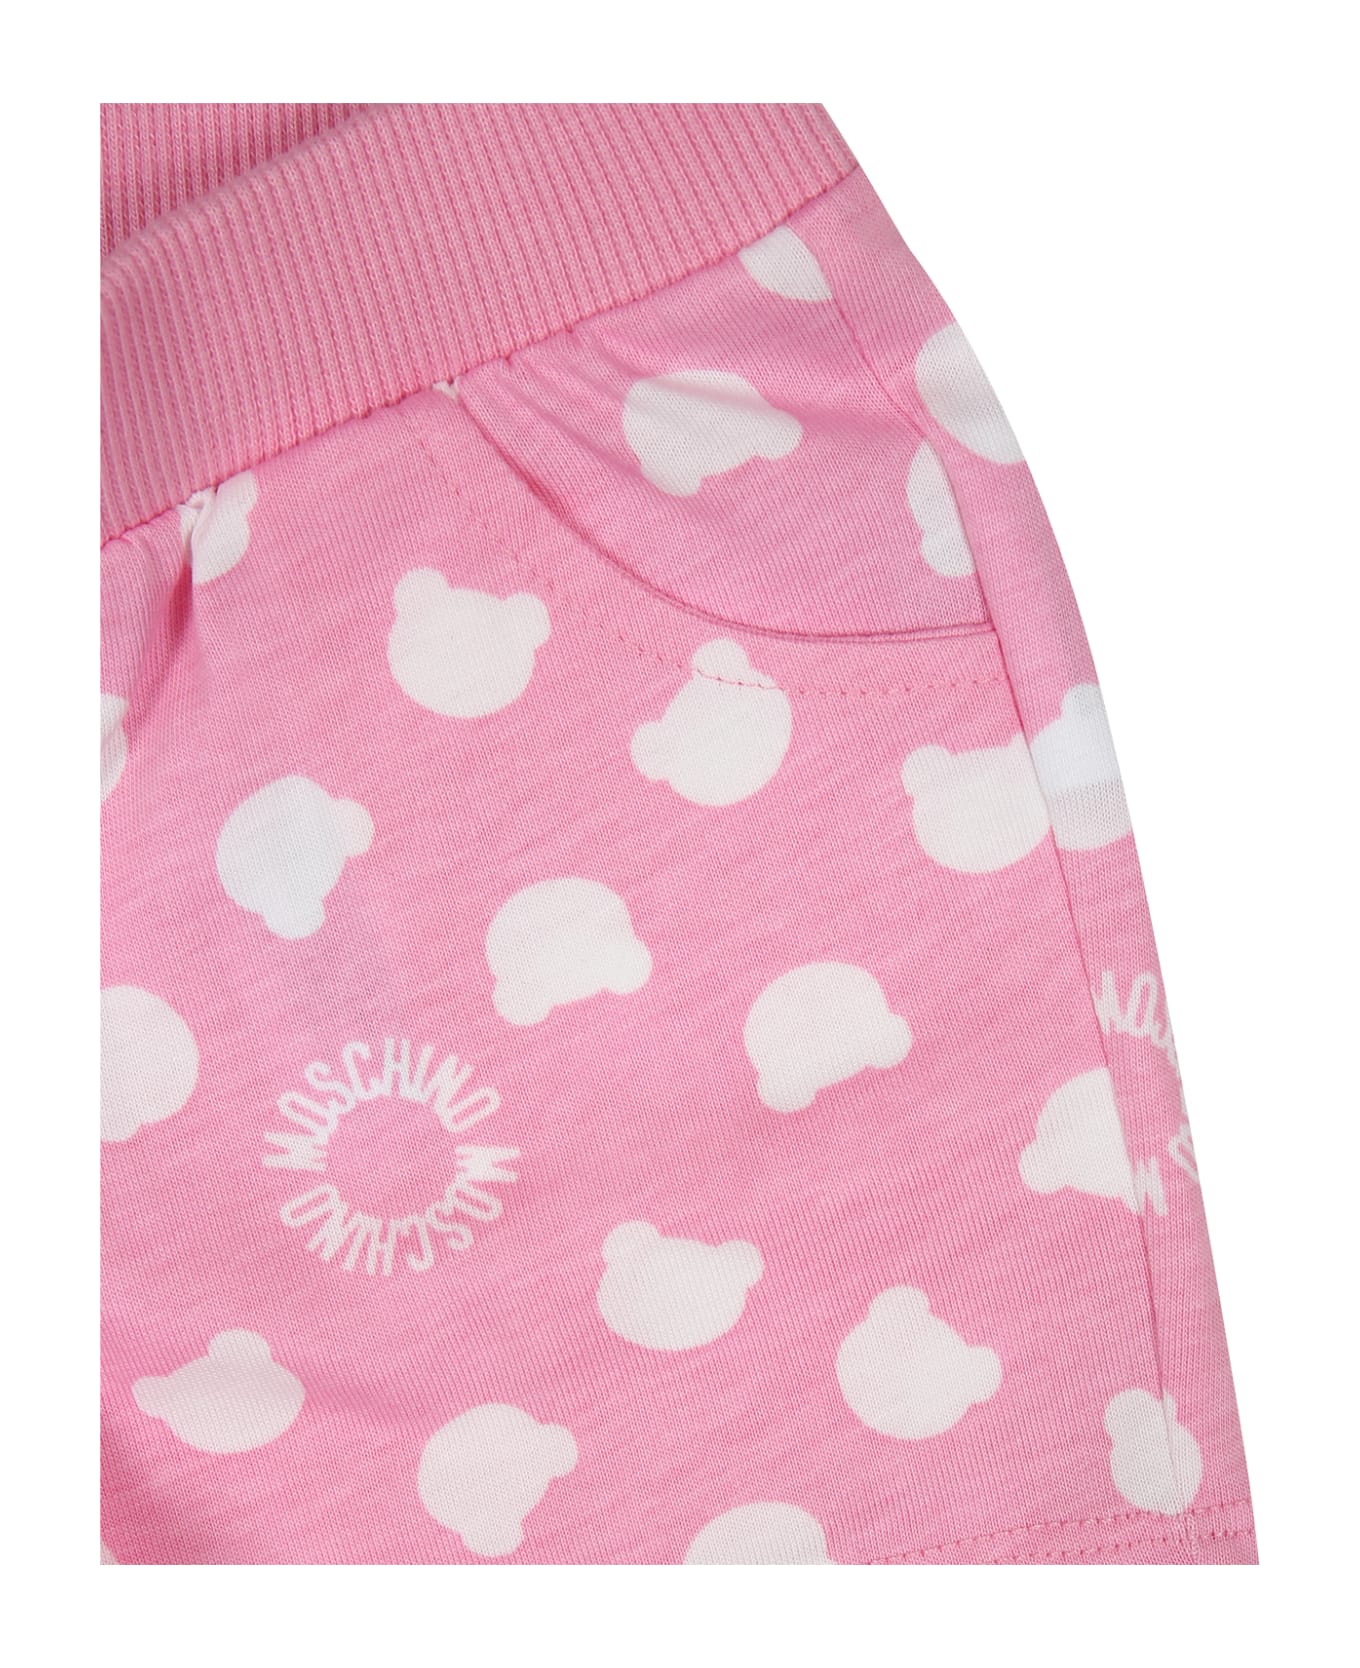 Moschino Pink Outfit For Baby Girl With Logo - Pink ボトムス